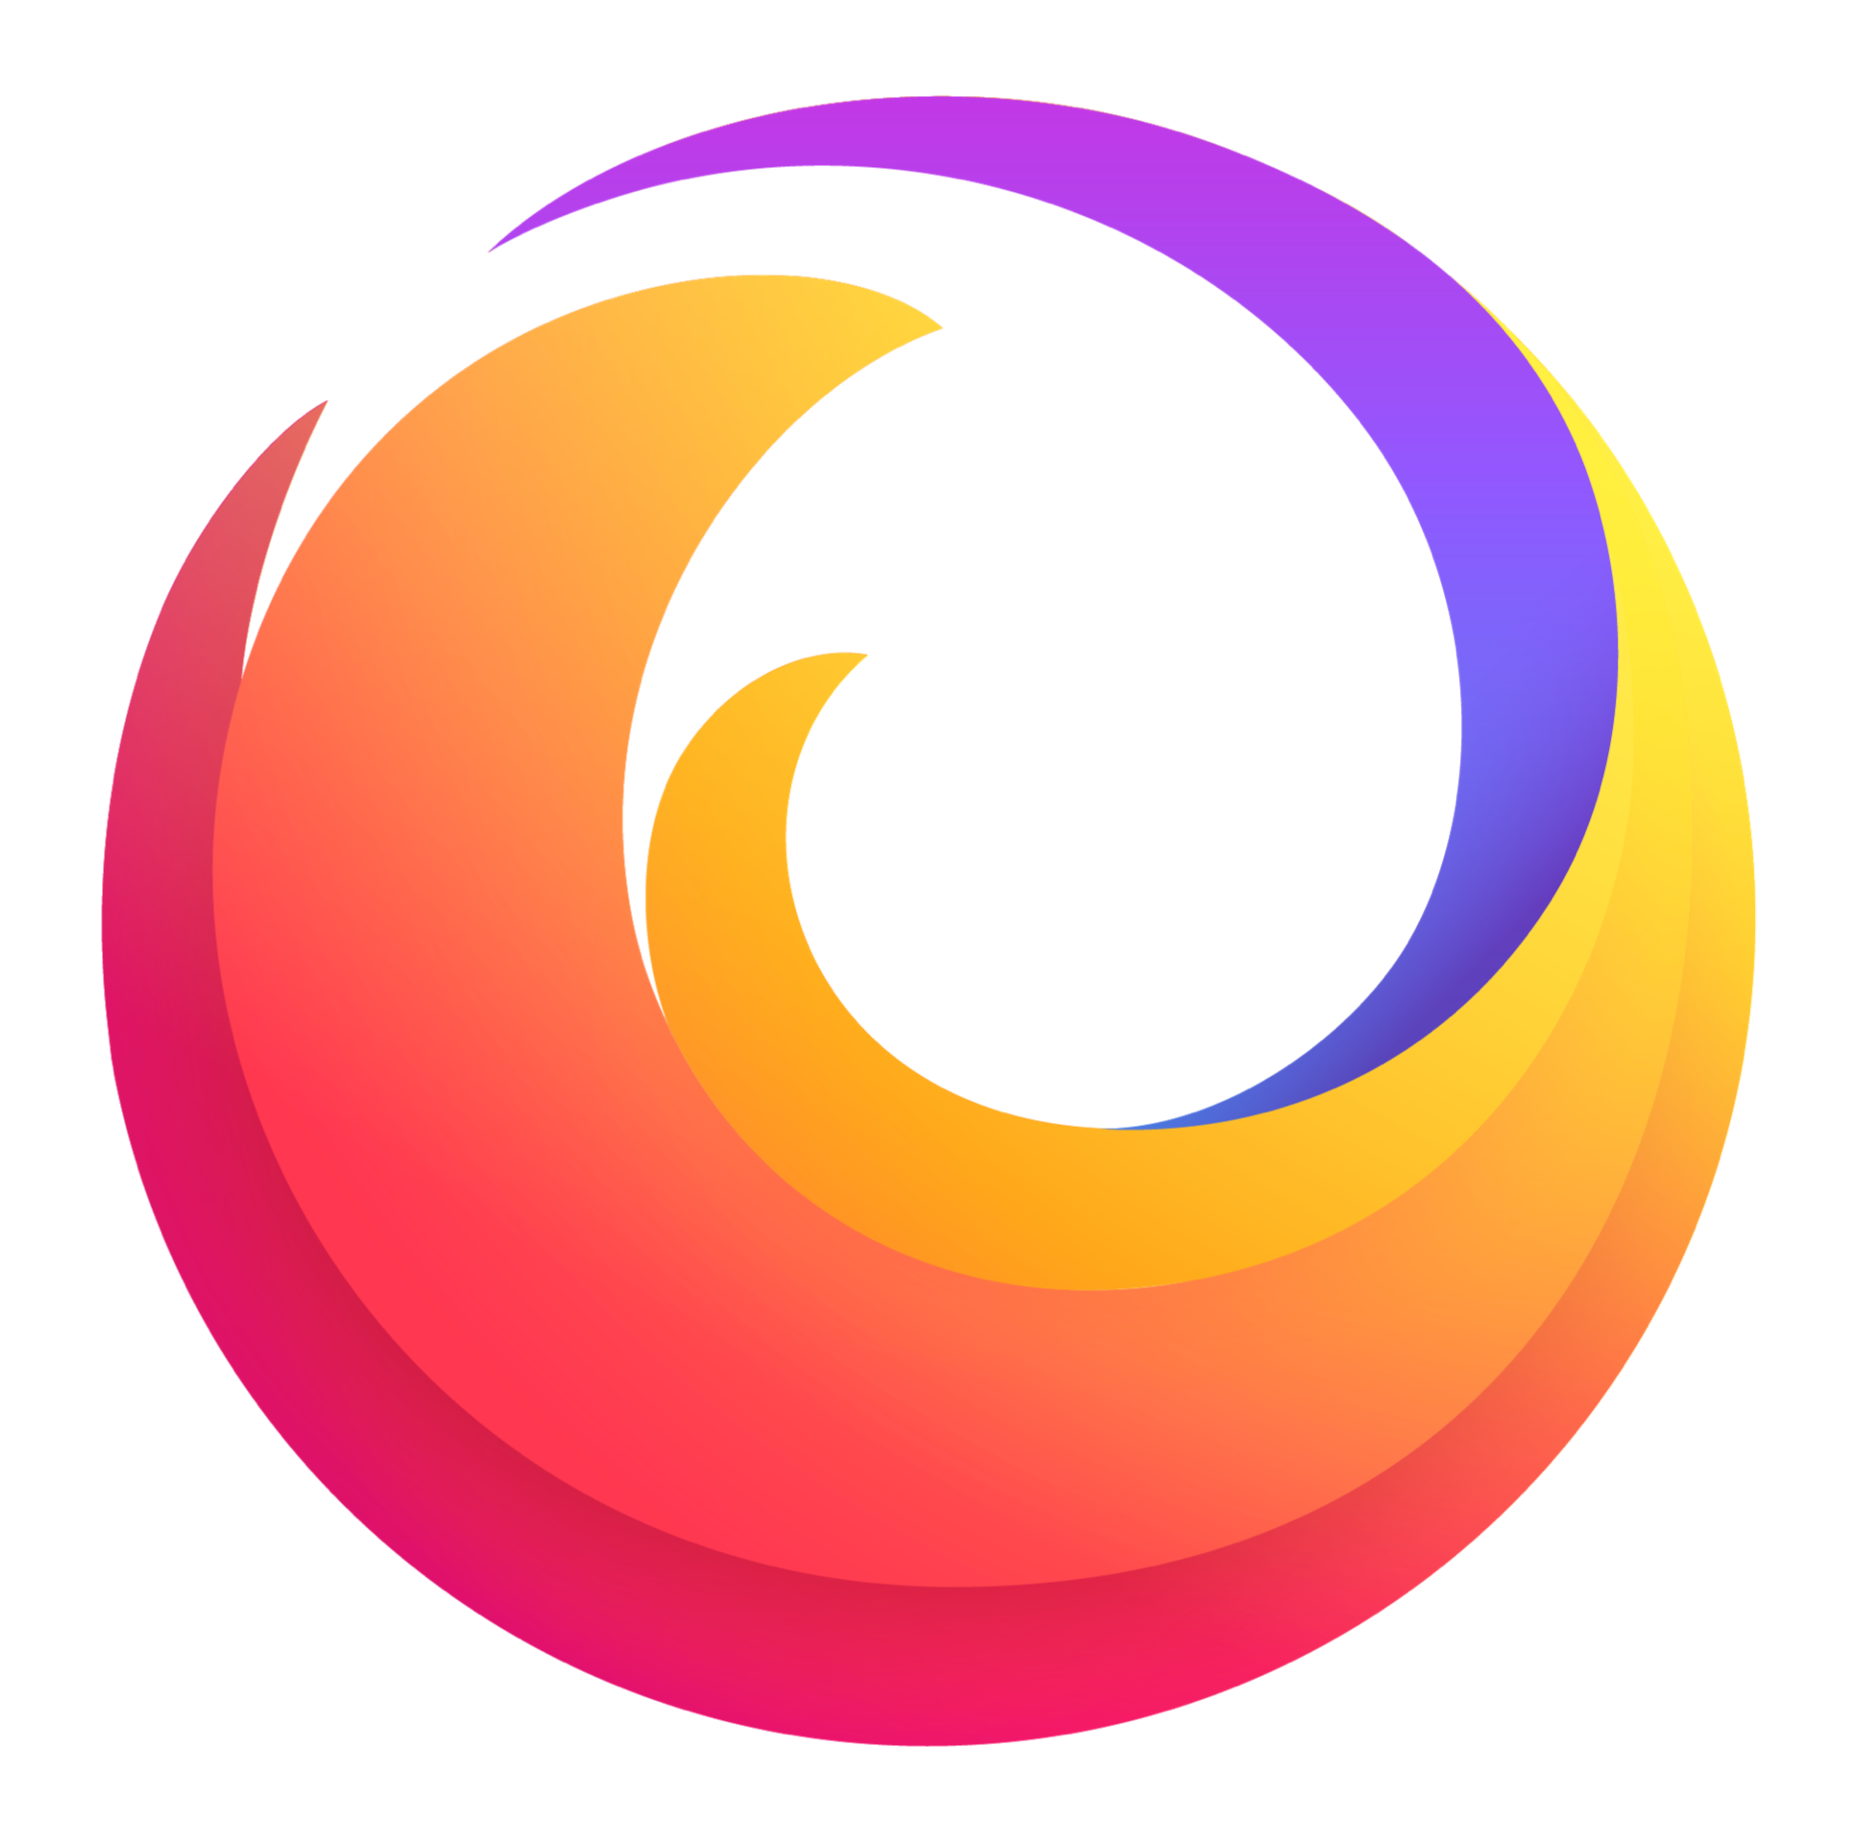 File:Extension Firefox.png - Wikimedia Commons